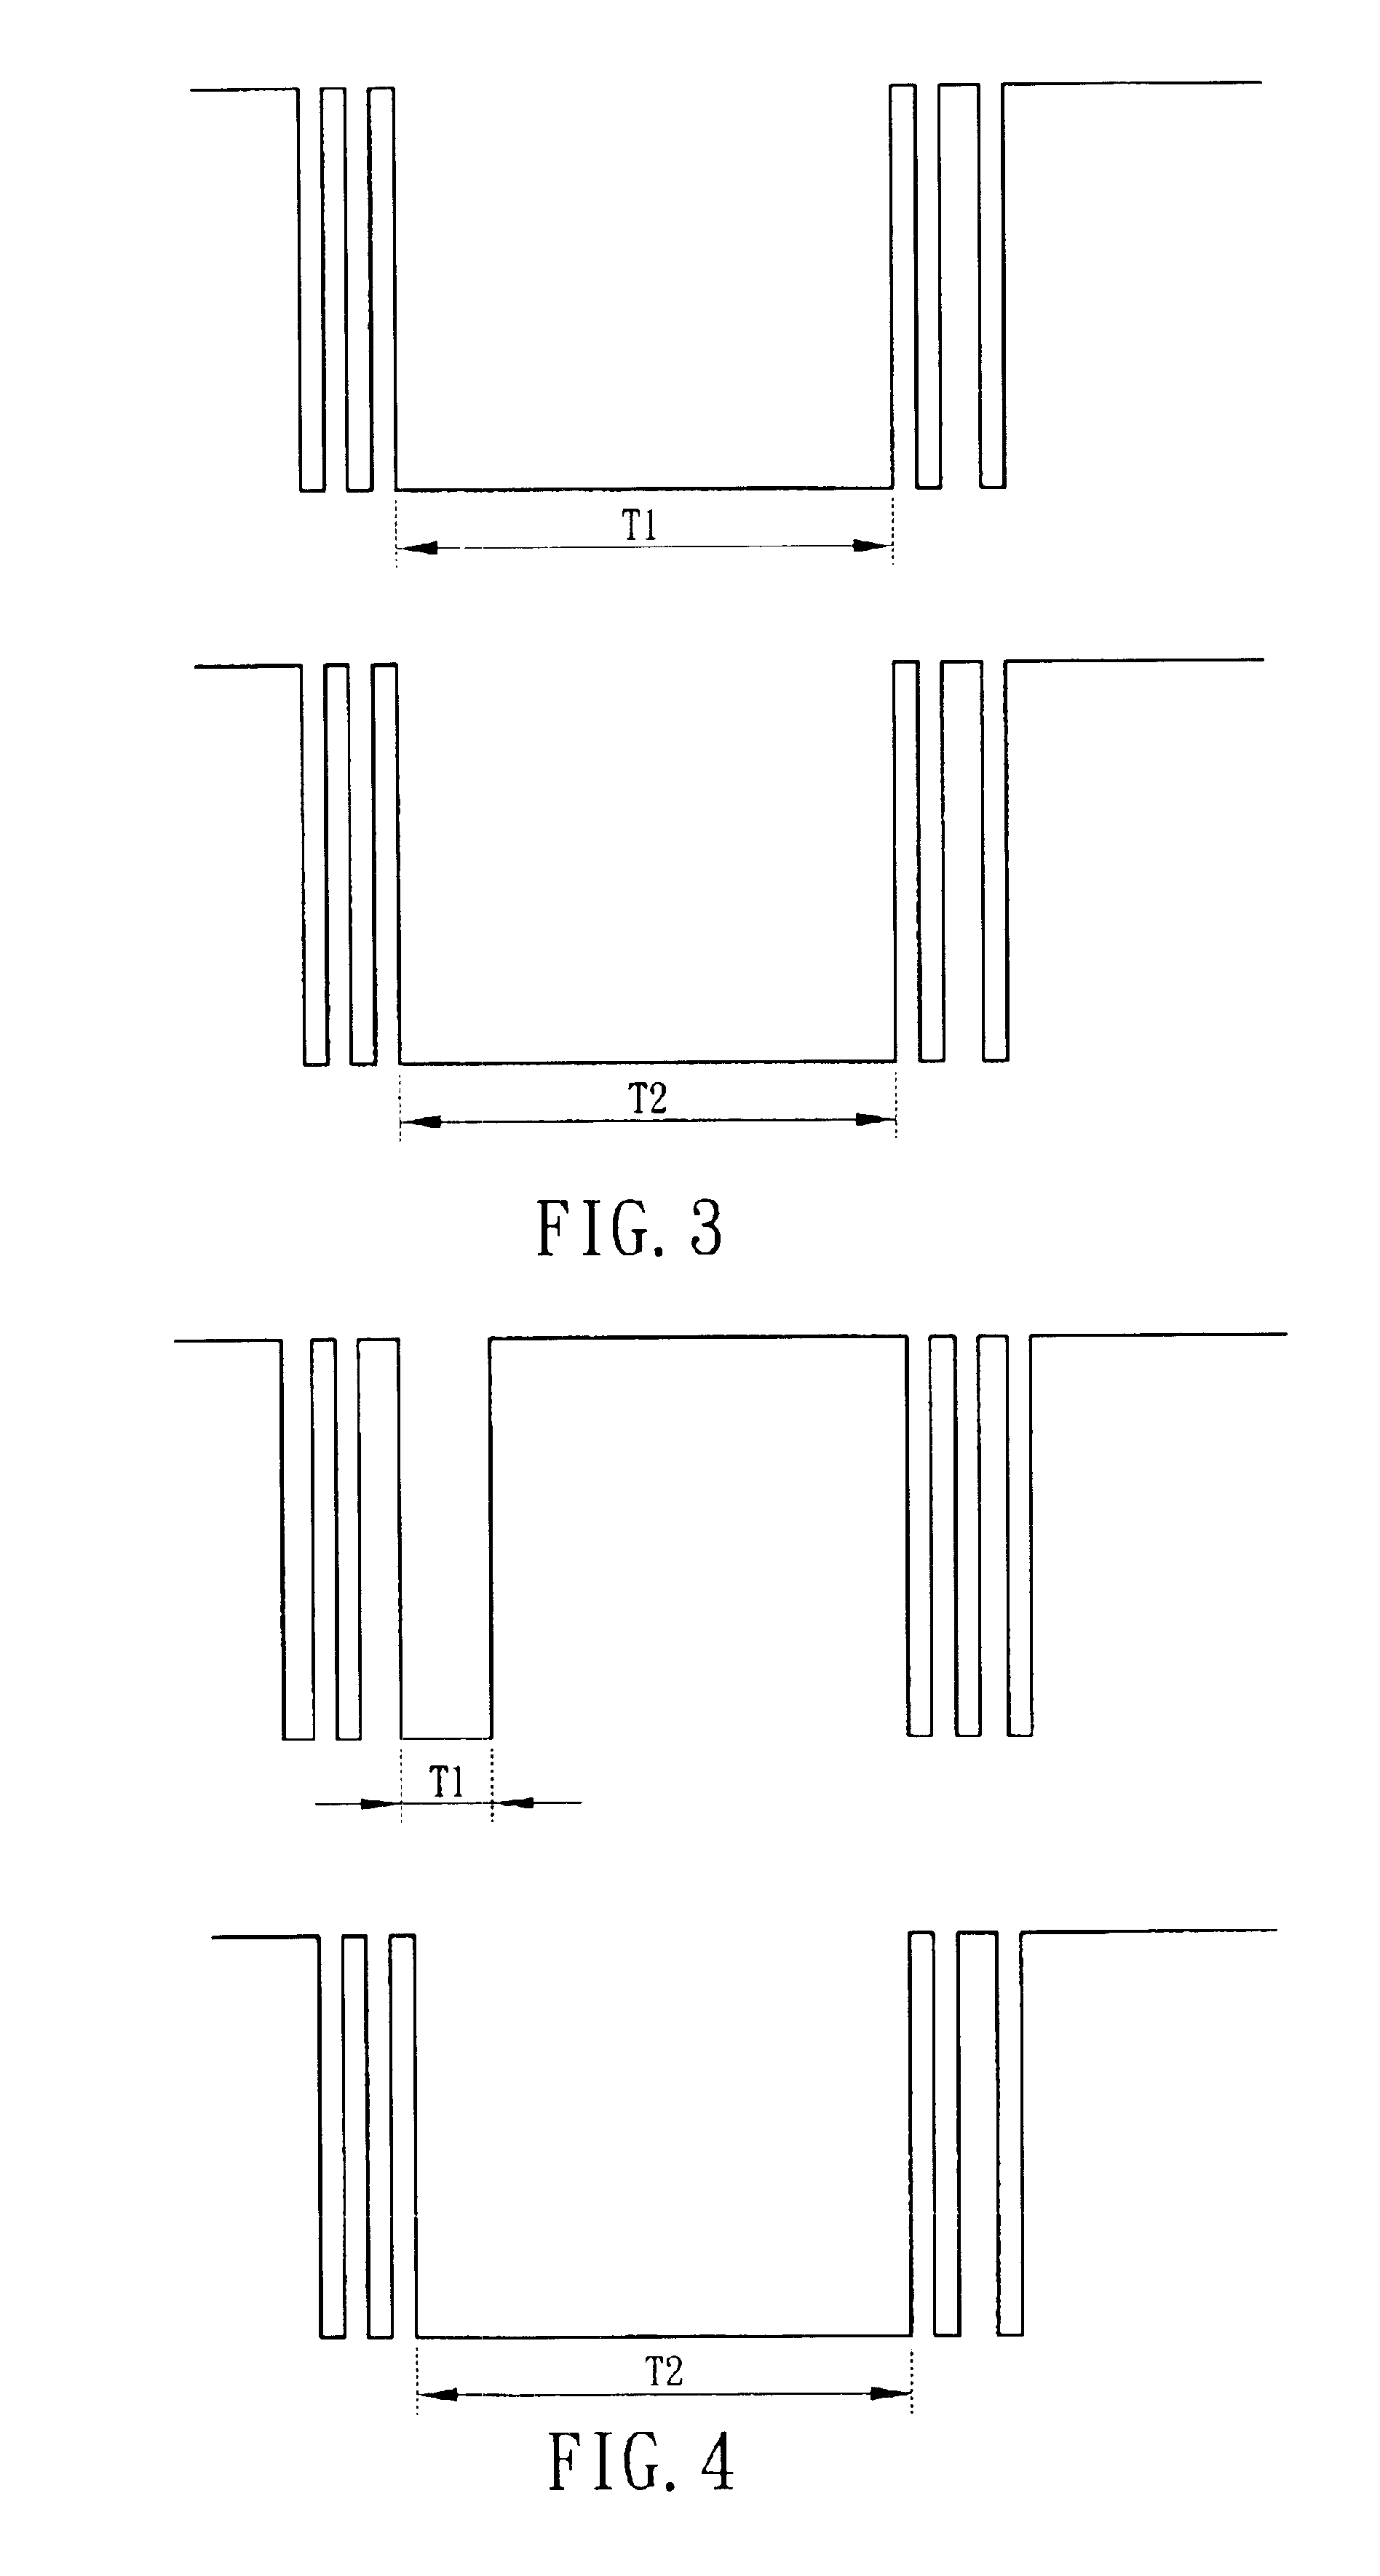 Method for inputting different characters by multi-directionally pressing a single key more than one time